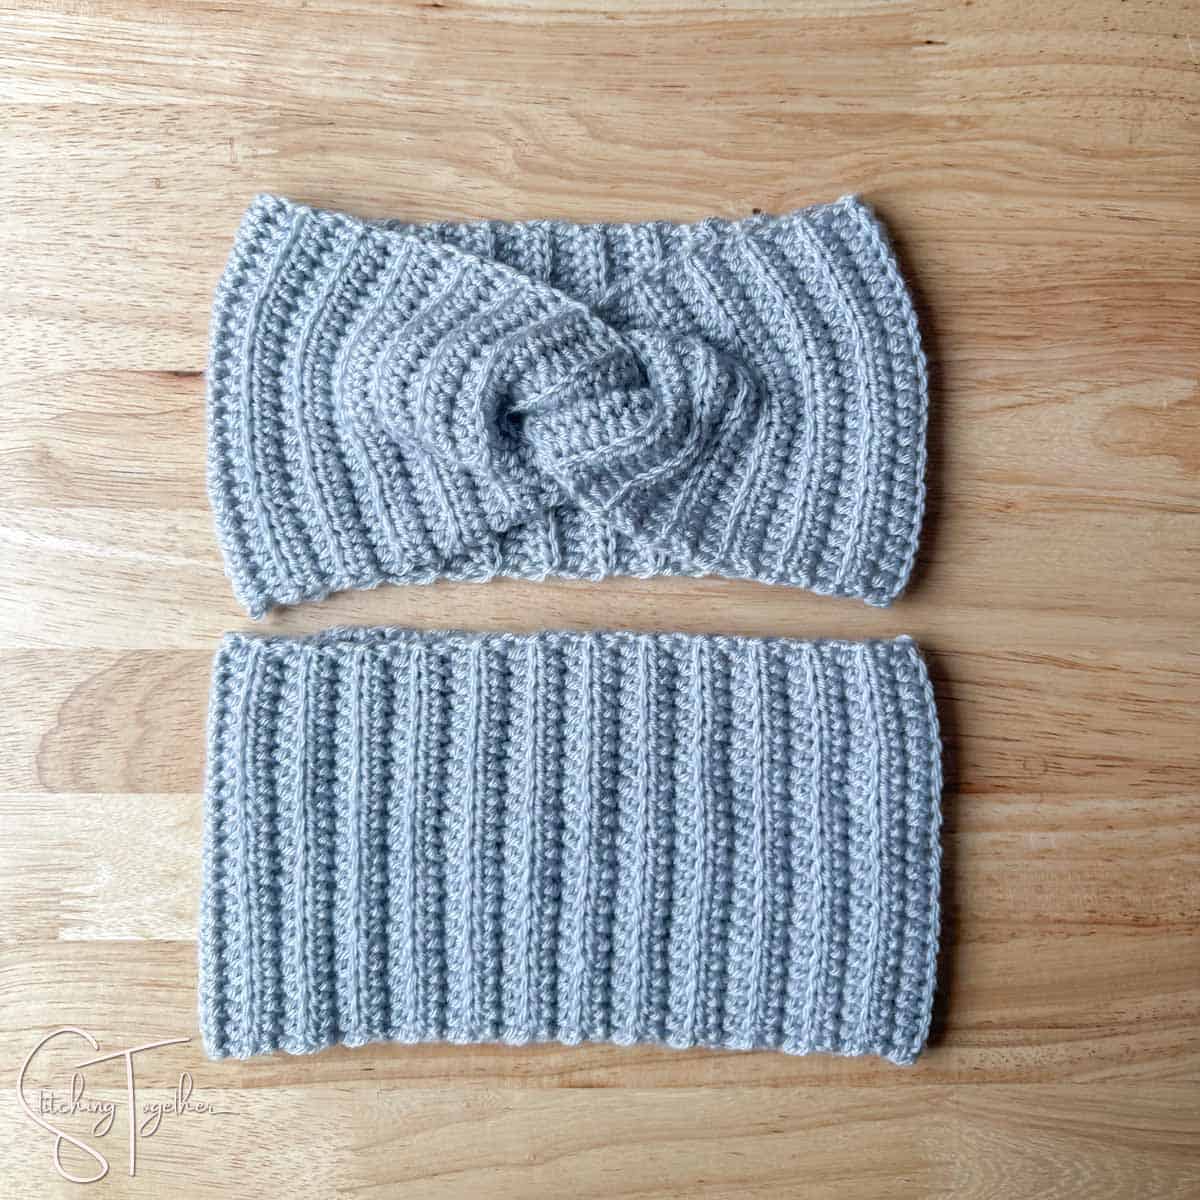 a crochet twisted headband and a crochet ribbed headband laying flat next to each other